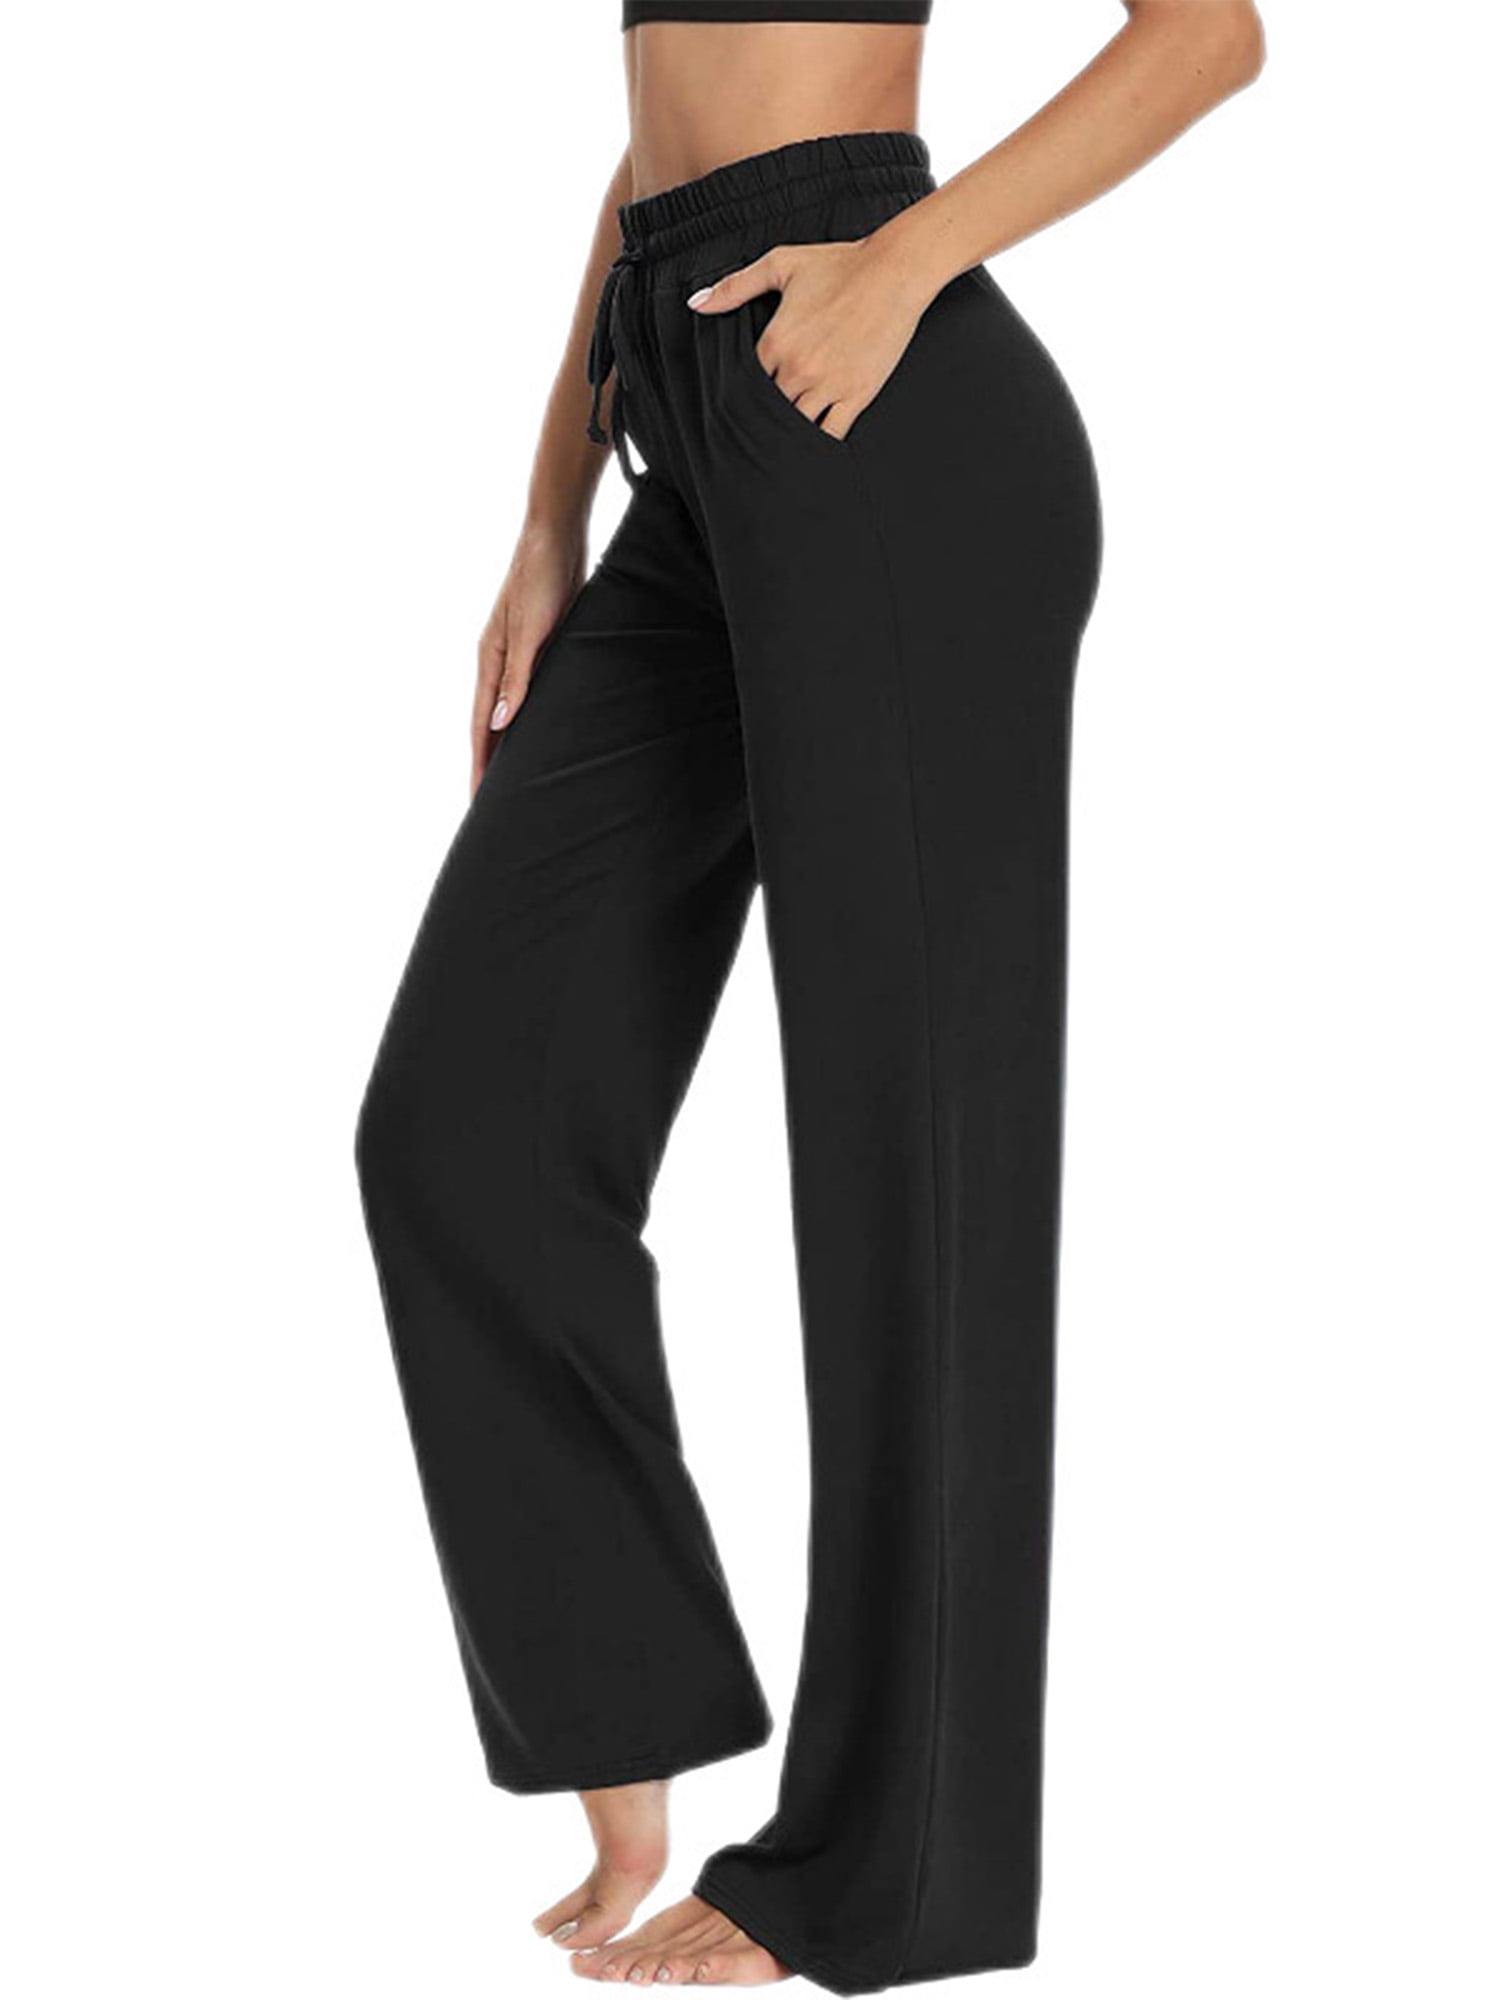 Womens Slim Fit Outdoor Yoga Sweatpants With Front Hand Pockets L 31 Fitness  Yoga Joggers, Loose Straight Fit, Casual Track Pants B232u From Ai809,  $22.83